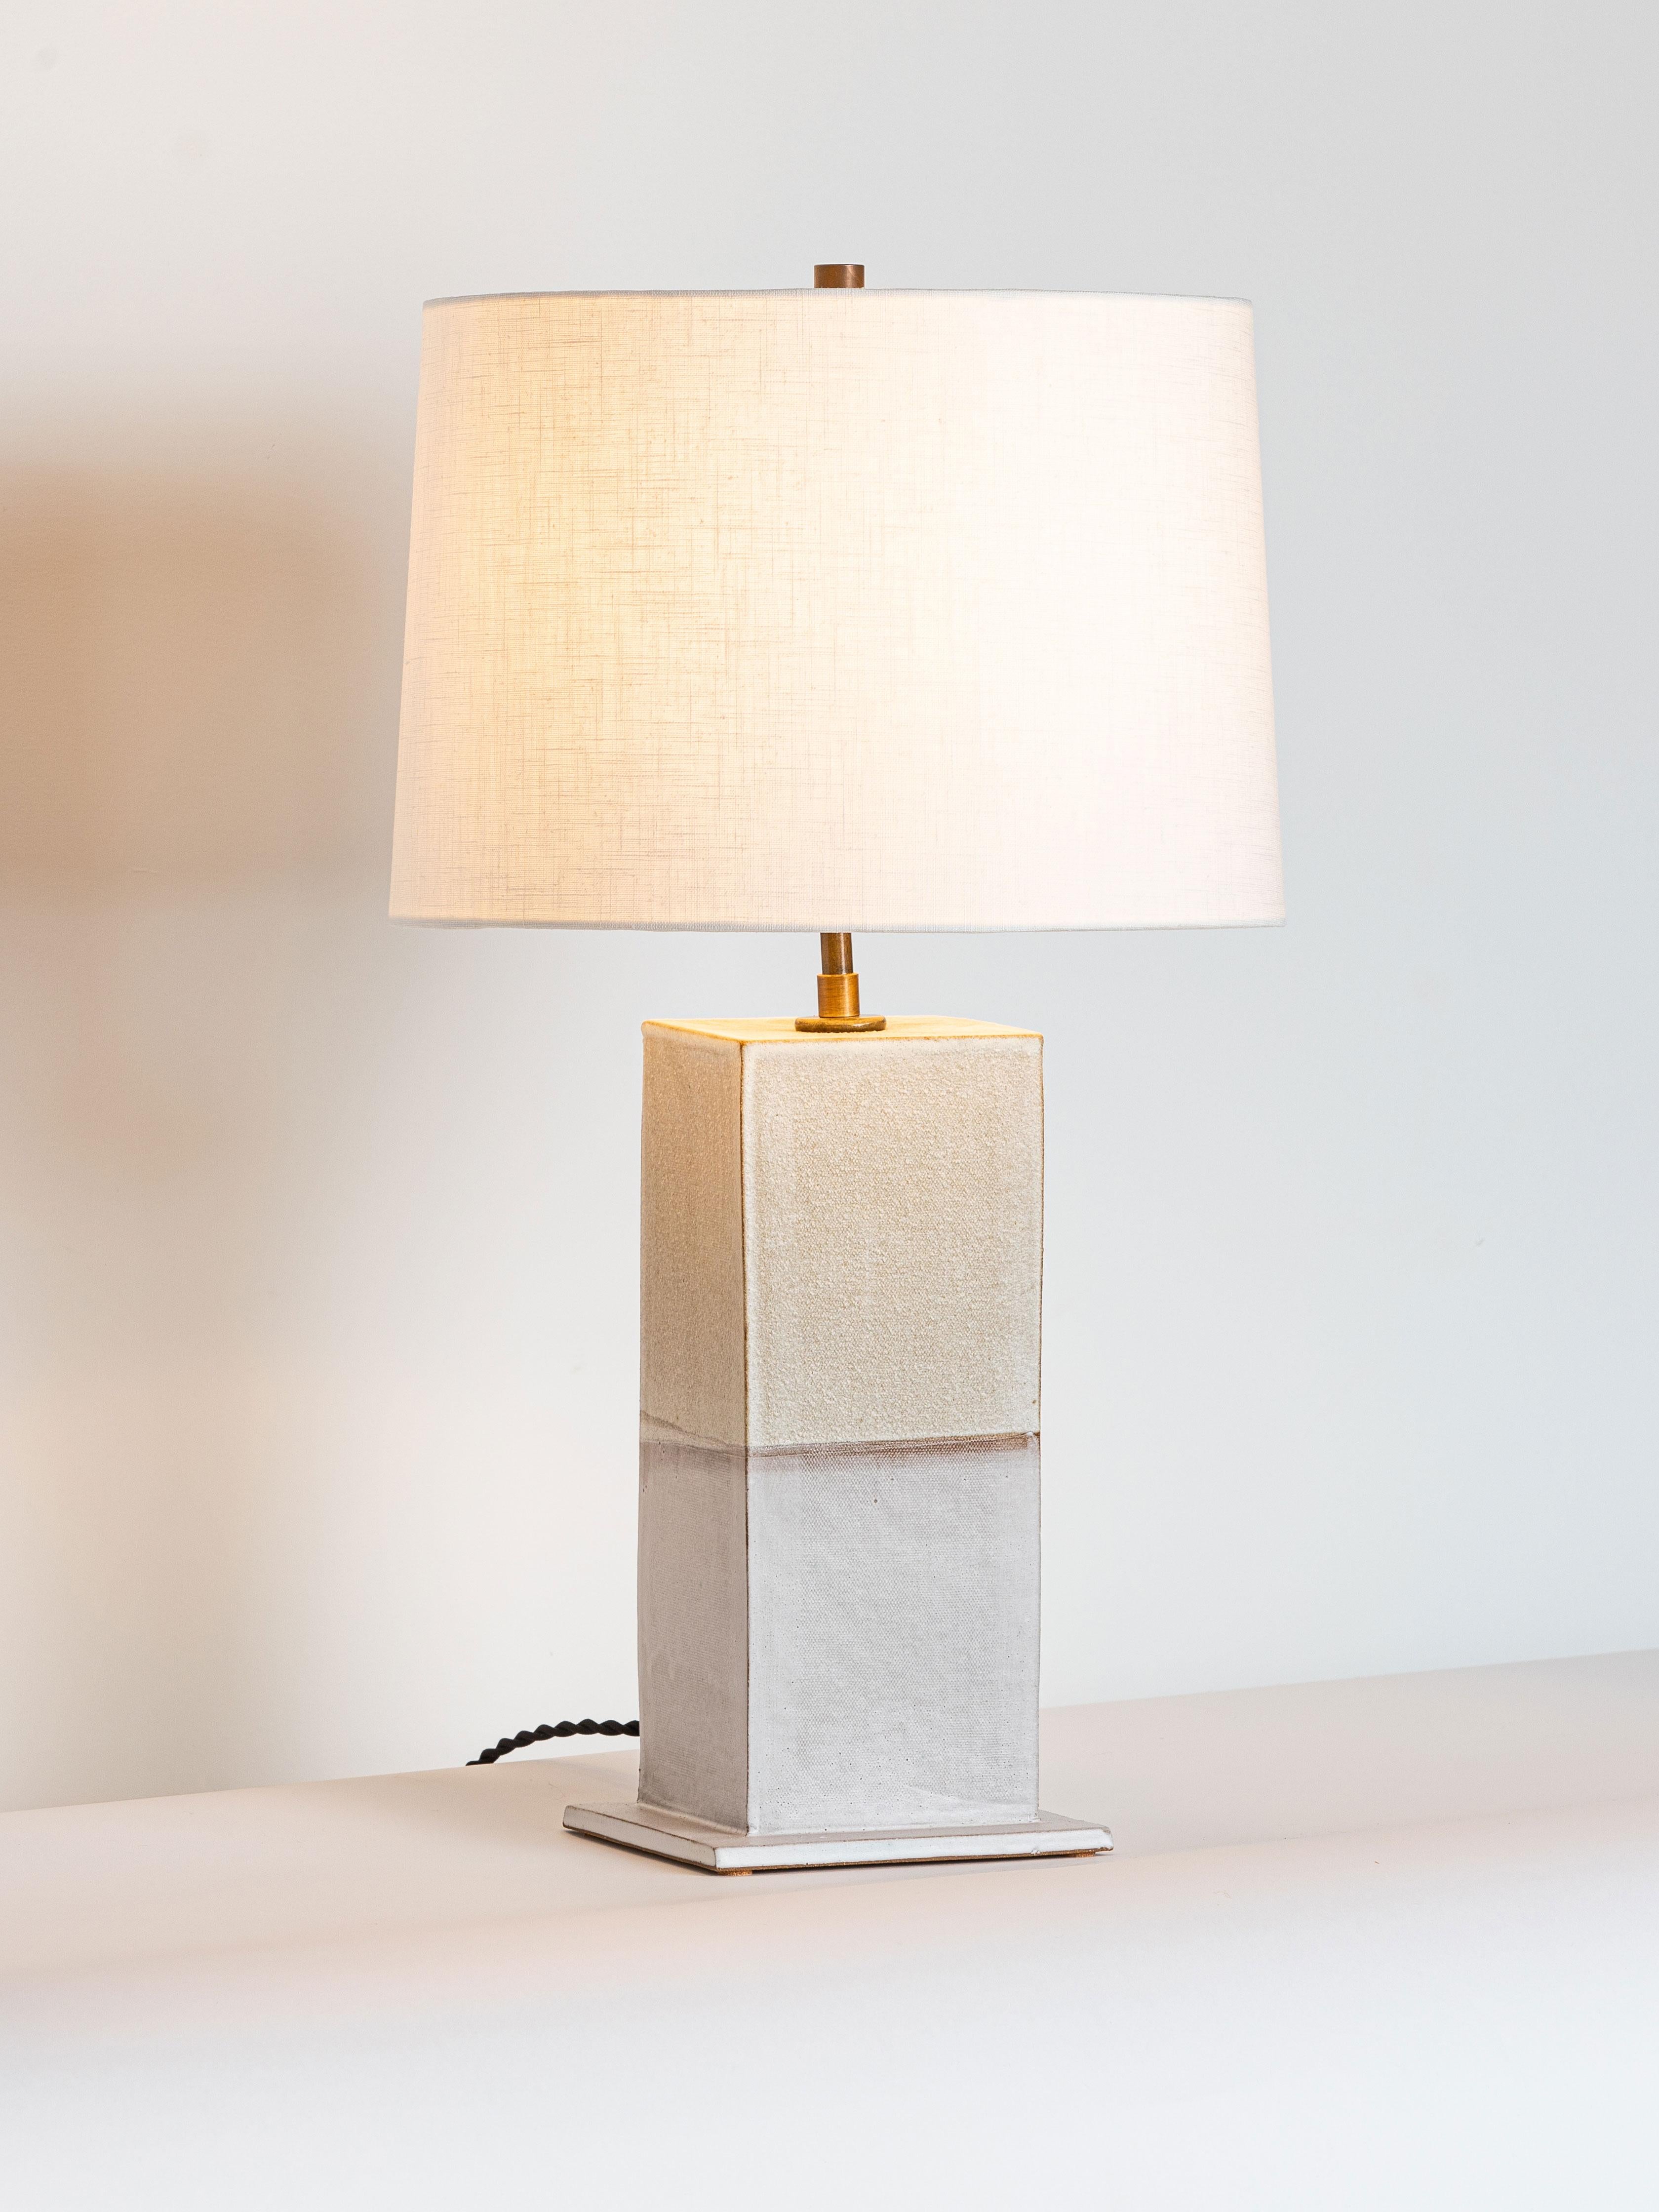 Our stoneware Sag Harbor lamp is handcrafted using slab-construction techniques.

Finish

- Dipped glaze, two colors, pictured in parchment & chalk 
- Antique brass fittings
- Twisted black-cloth cord
- Full-range dimmer socket
-